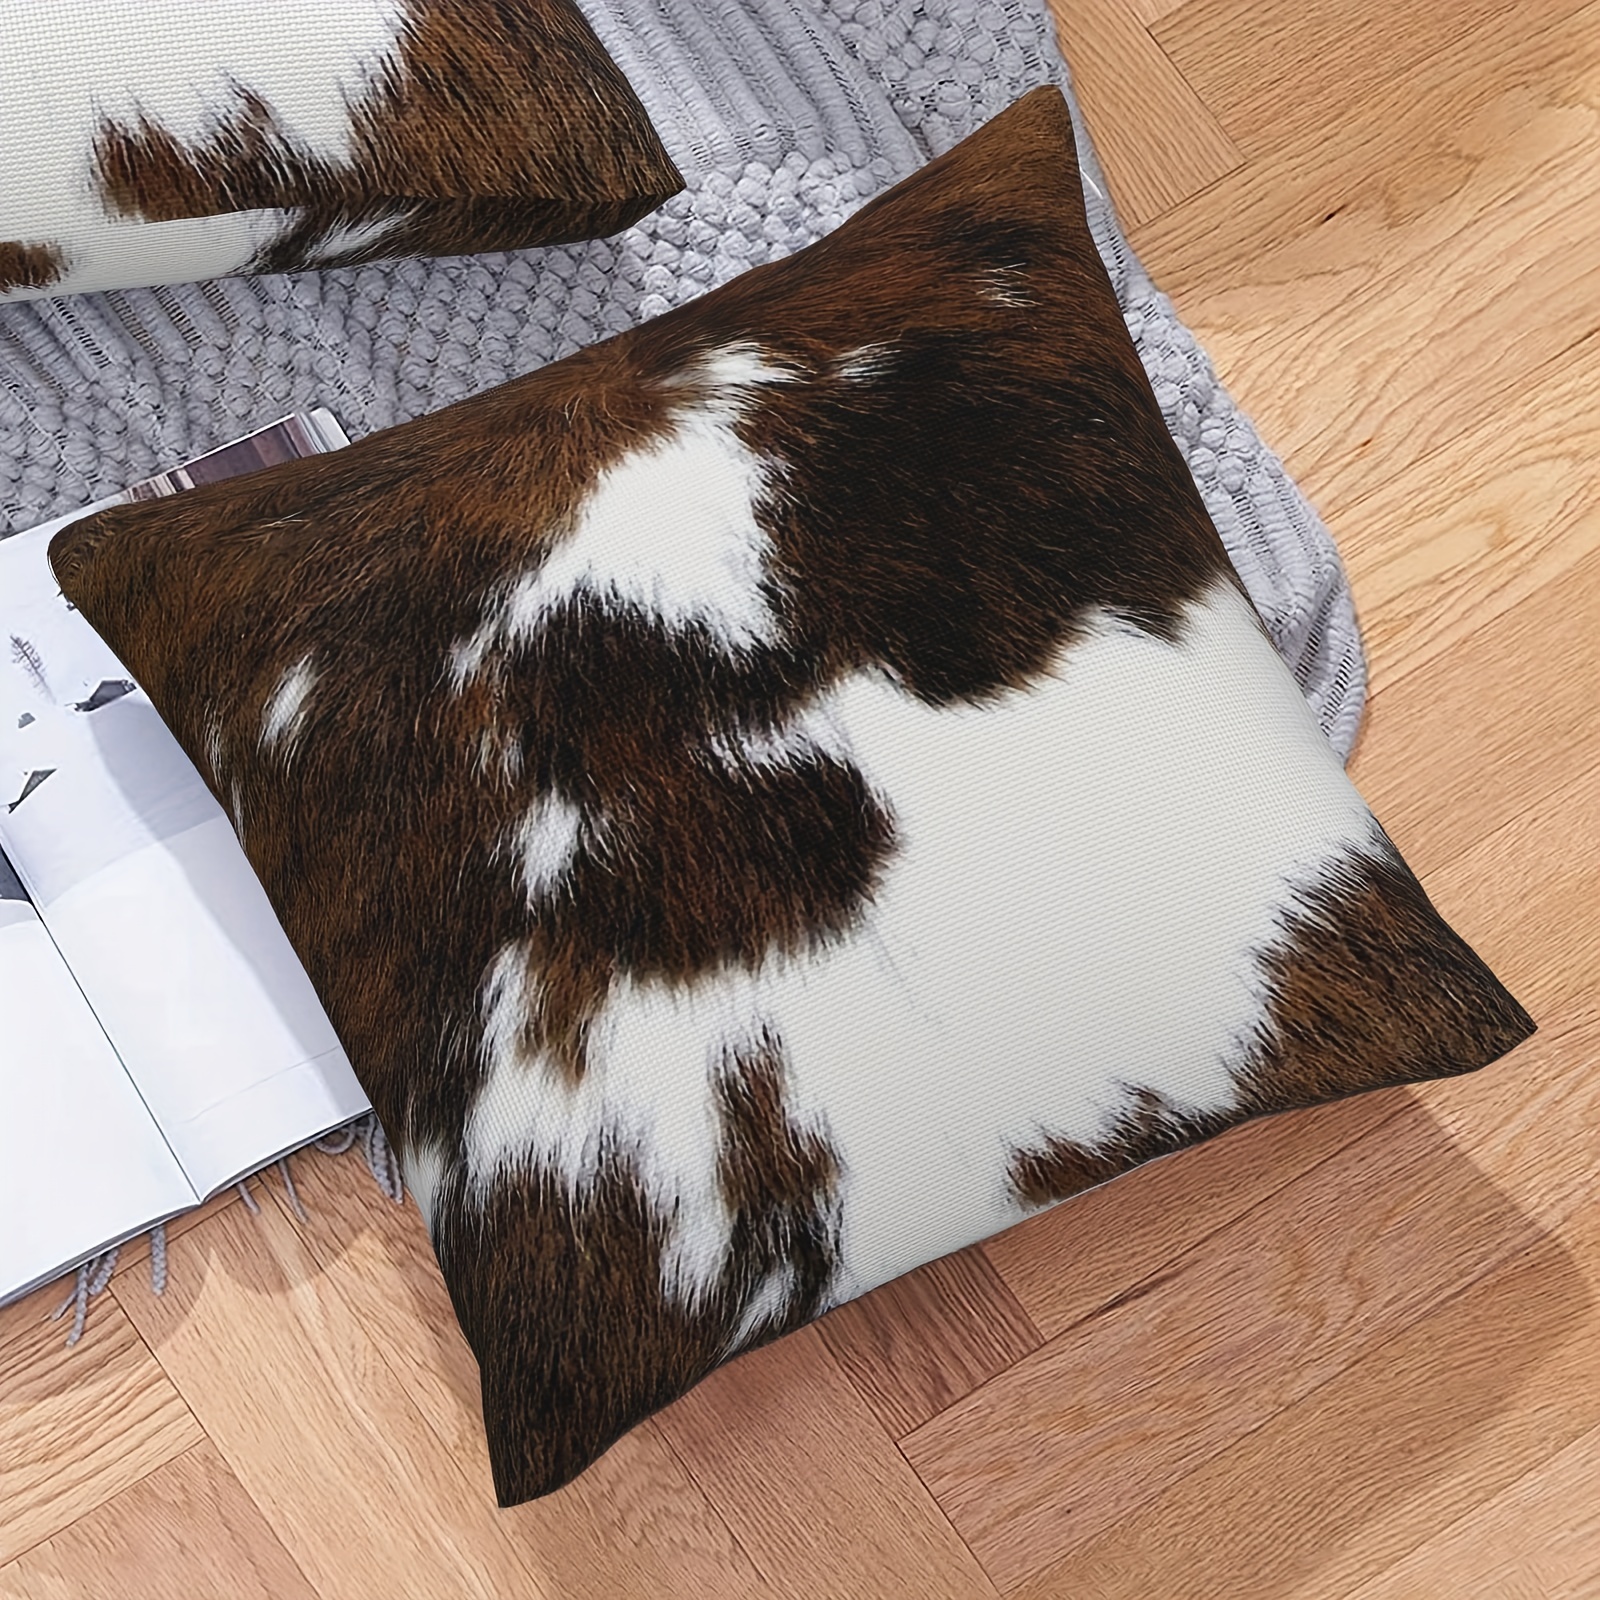  Cowhide Pillow Covers 16x16 Western Farm Animal Fur Cushion  Covers,Brown White Cow Print Throw Pillow Covers Bedroom Living Room  Decor,Wildlife Rustic Farmhouse Cow Decorative Pillow Covers : Home &  Kitchen